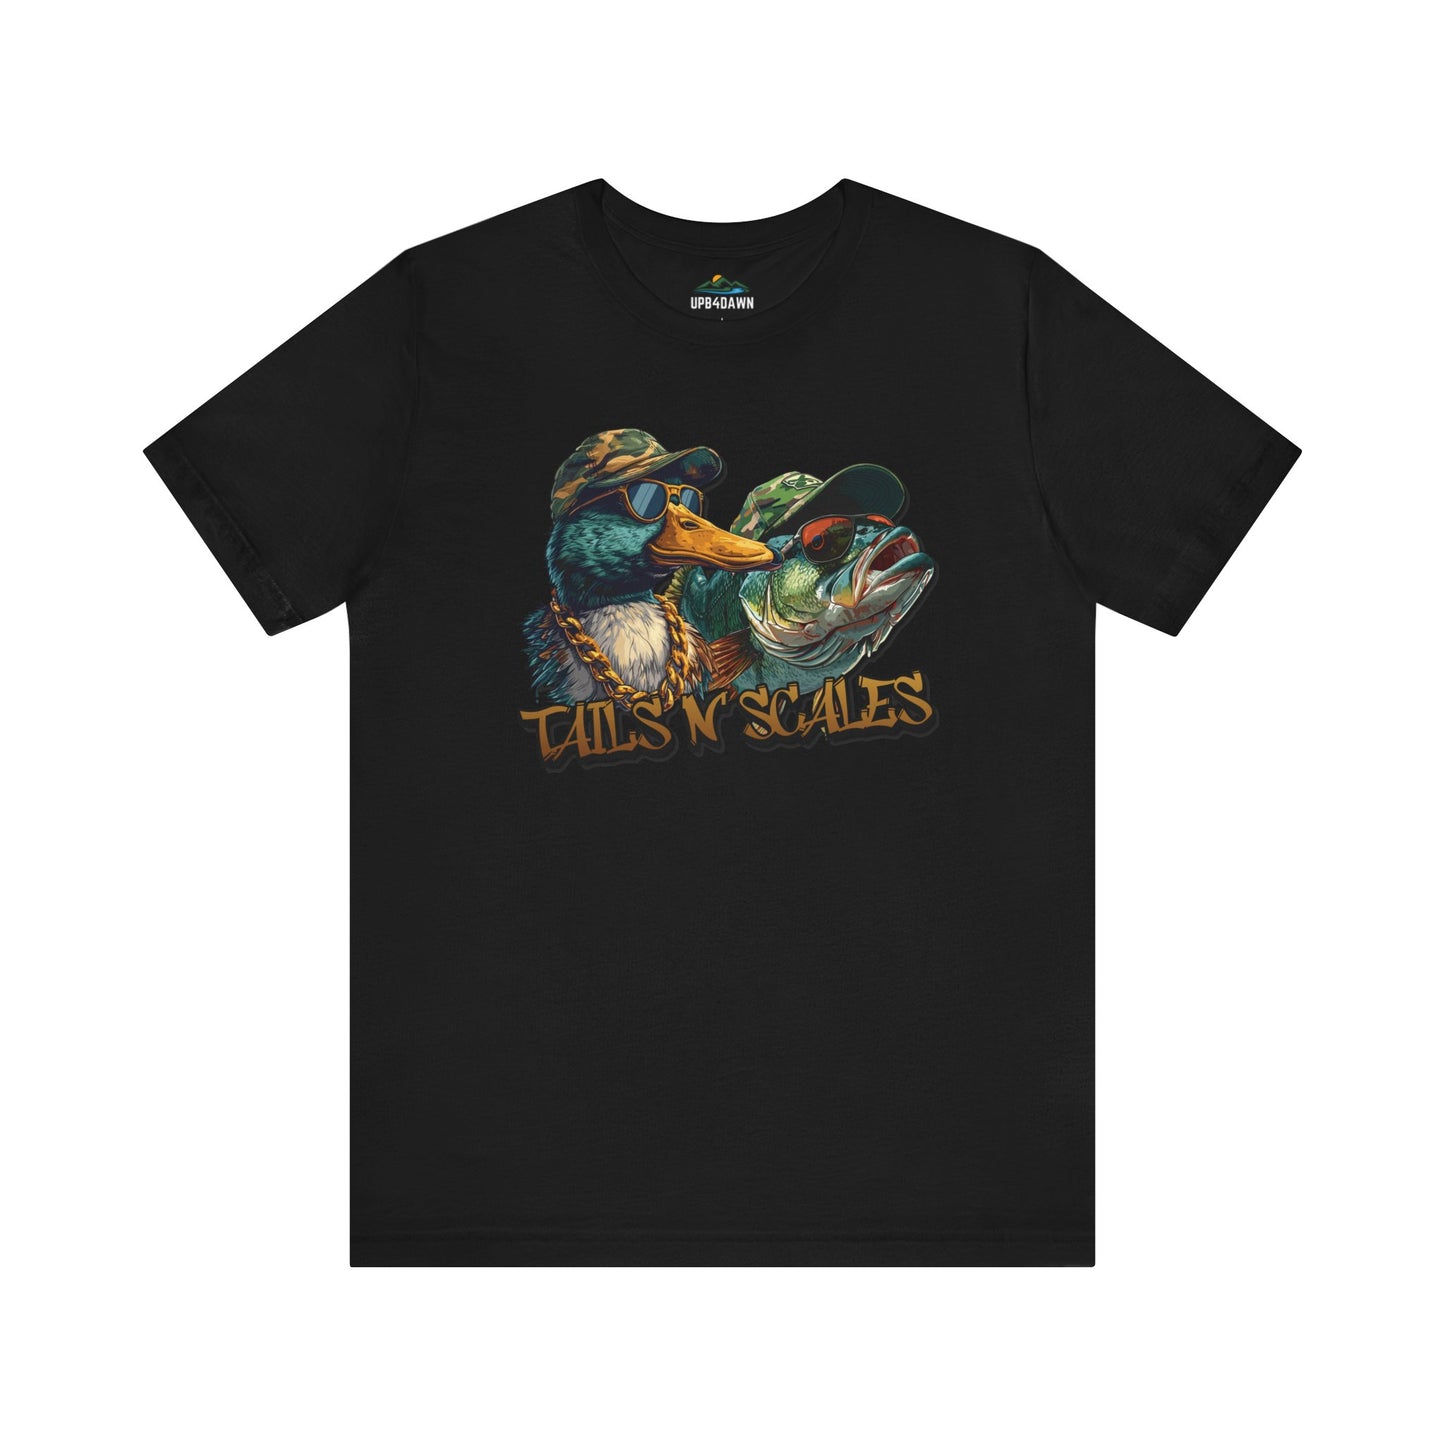 A Tails and Scales - T-Shirt with a colorful print of two ducks dressed in hip-hop style, sporting sunglasses and caps, with the words "wings 'n scales" below them, perfect as outdoor adventure apparel.